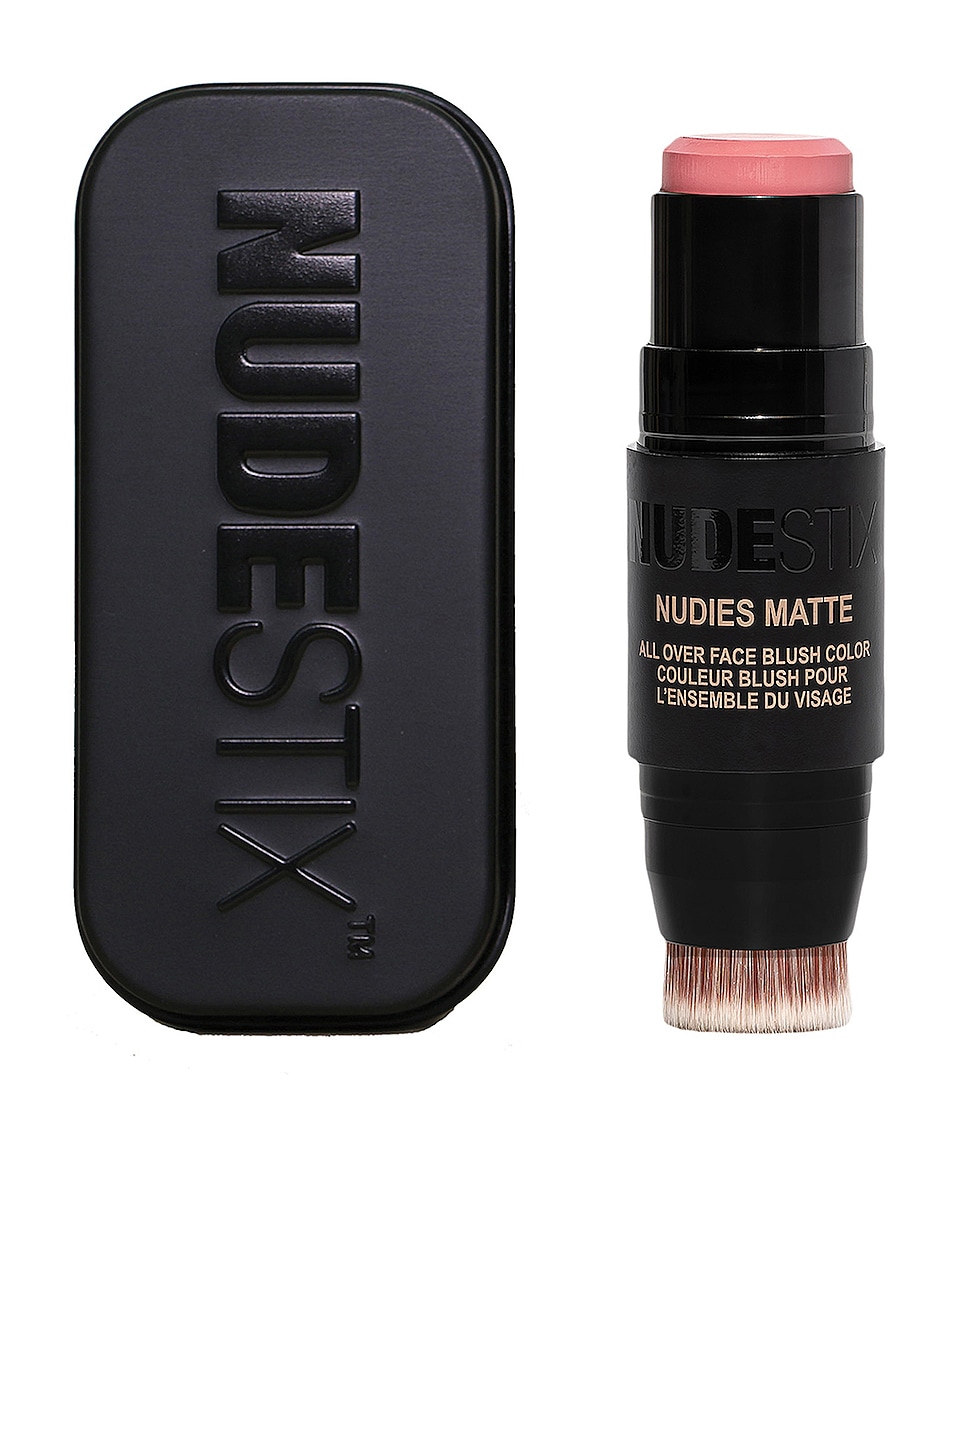 цена Румяна NUDESTIX Nudies Matte All Over Face Blush Color, цвет Sunkissed Pink